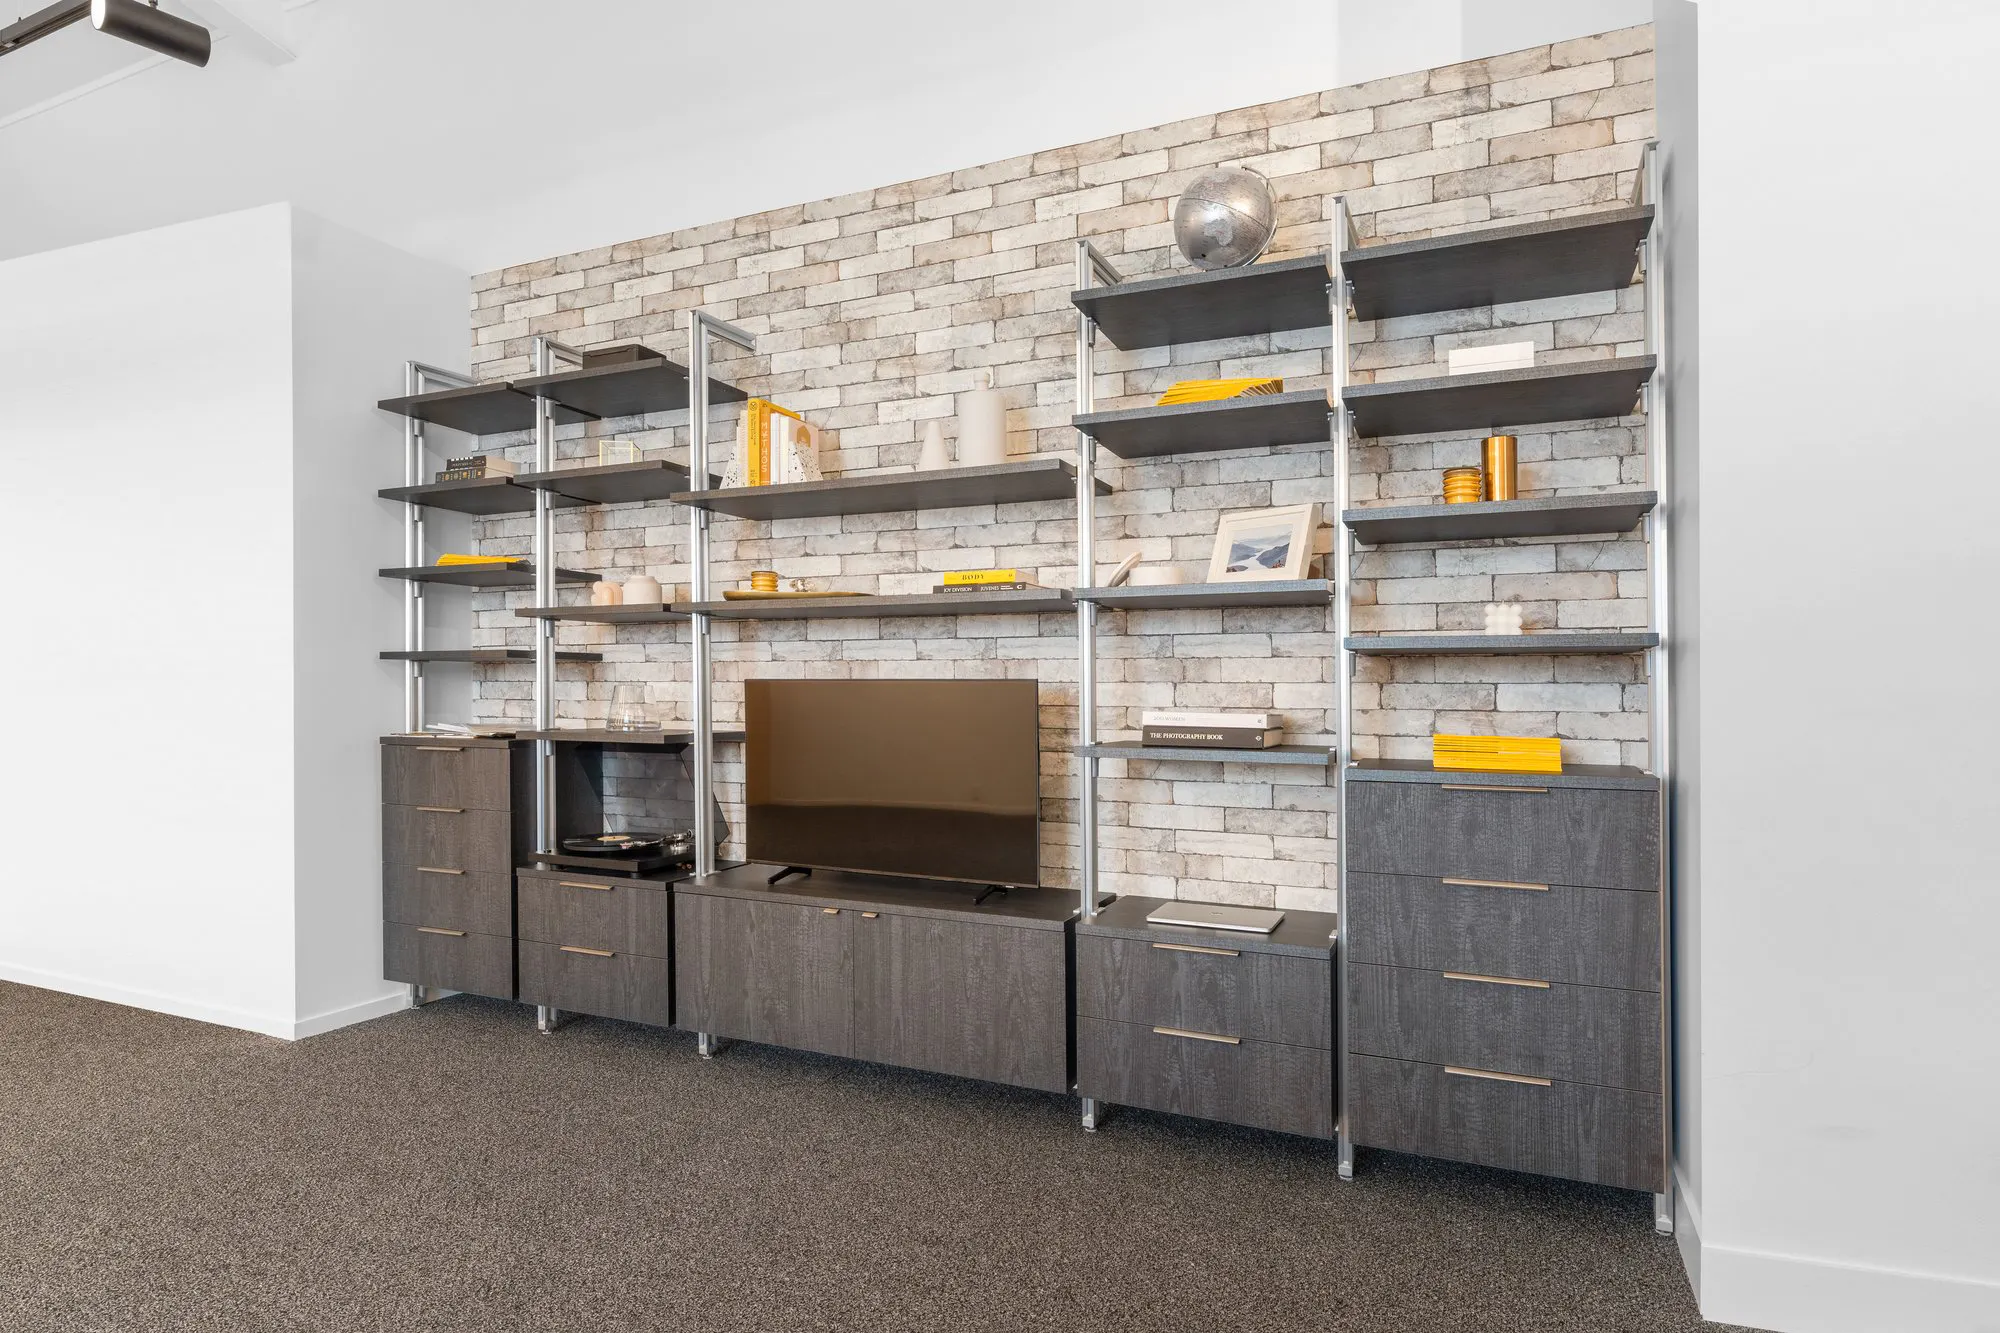 Living room cabinetry with shelving, cupboards and drawers